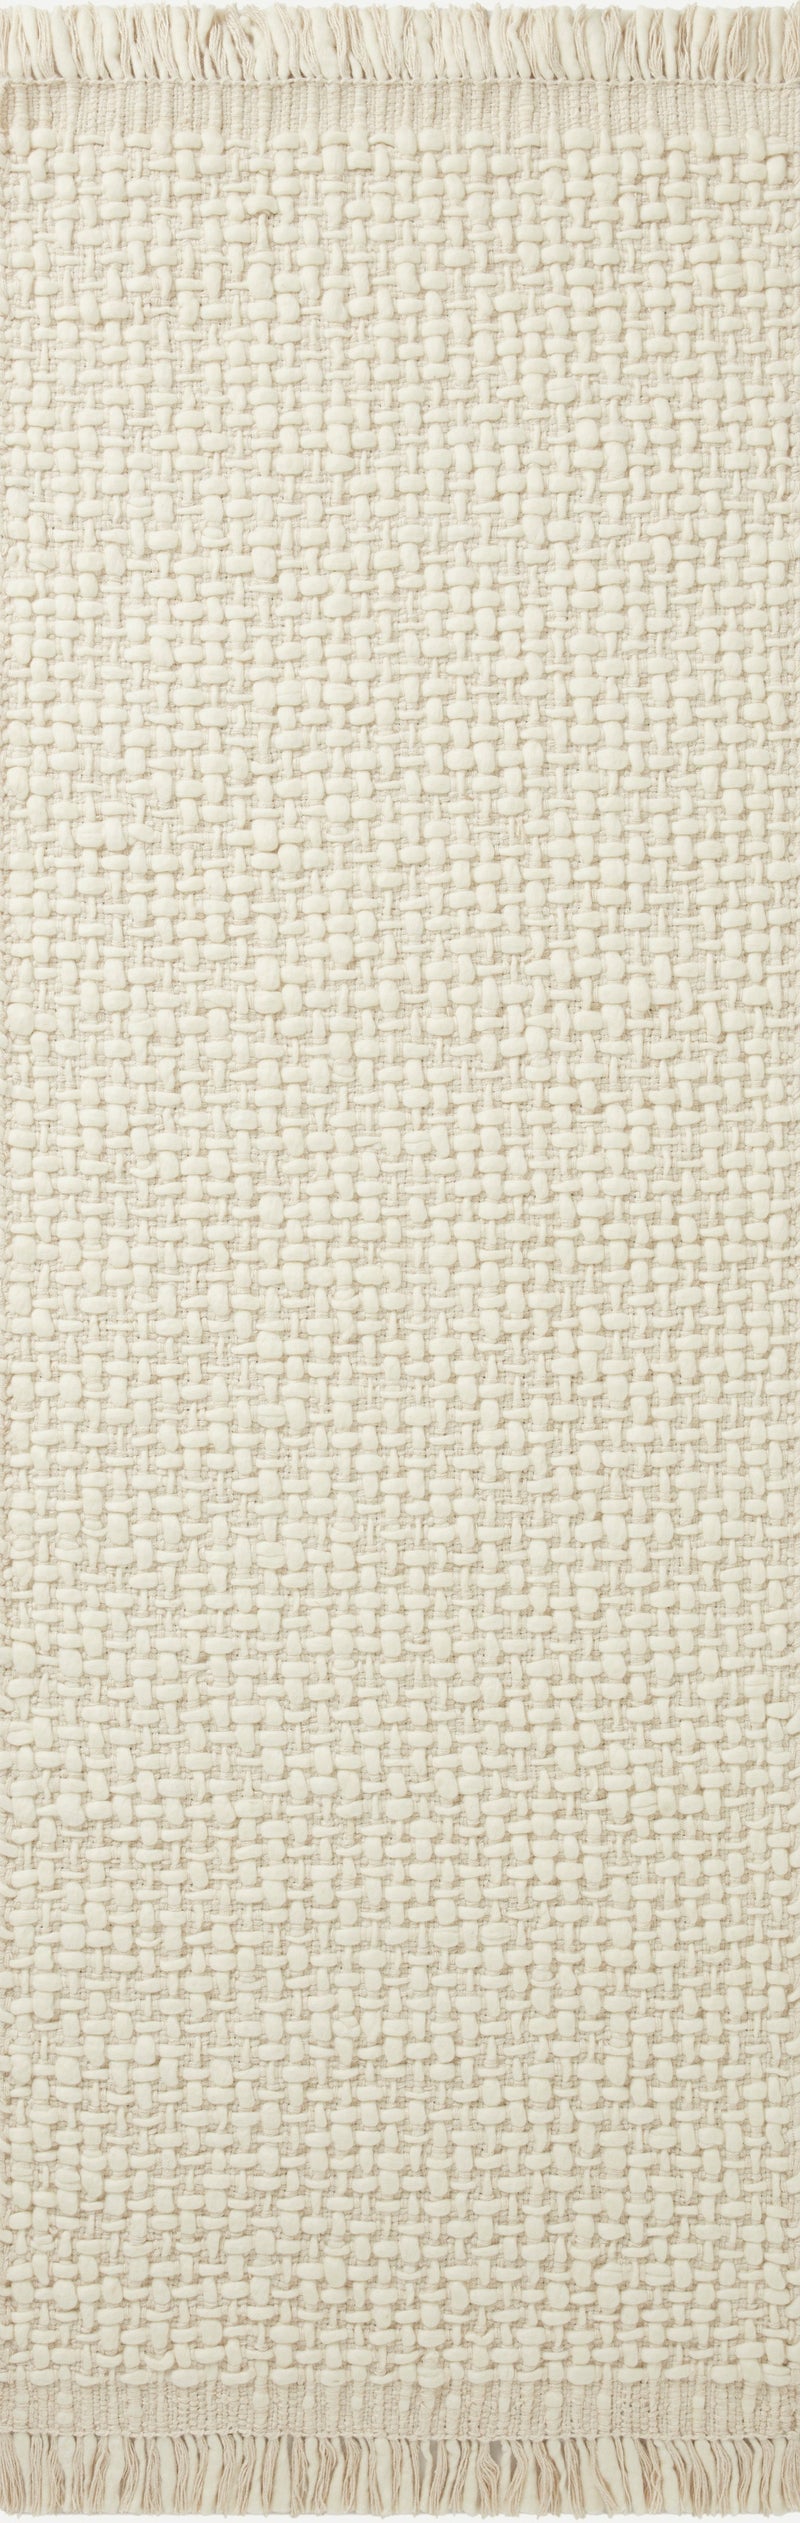 media image for yellowstone hand woven ivory ivory rug by amber lewis x loloi yeloyel 01ivivb6f0 2 271